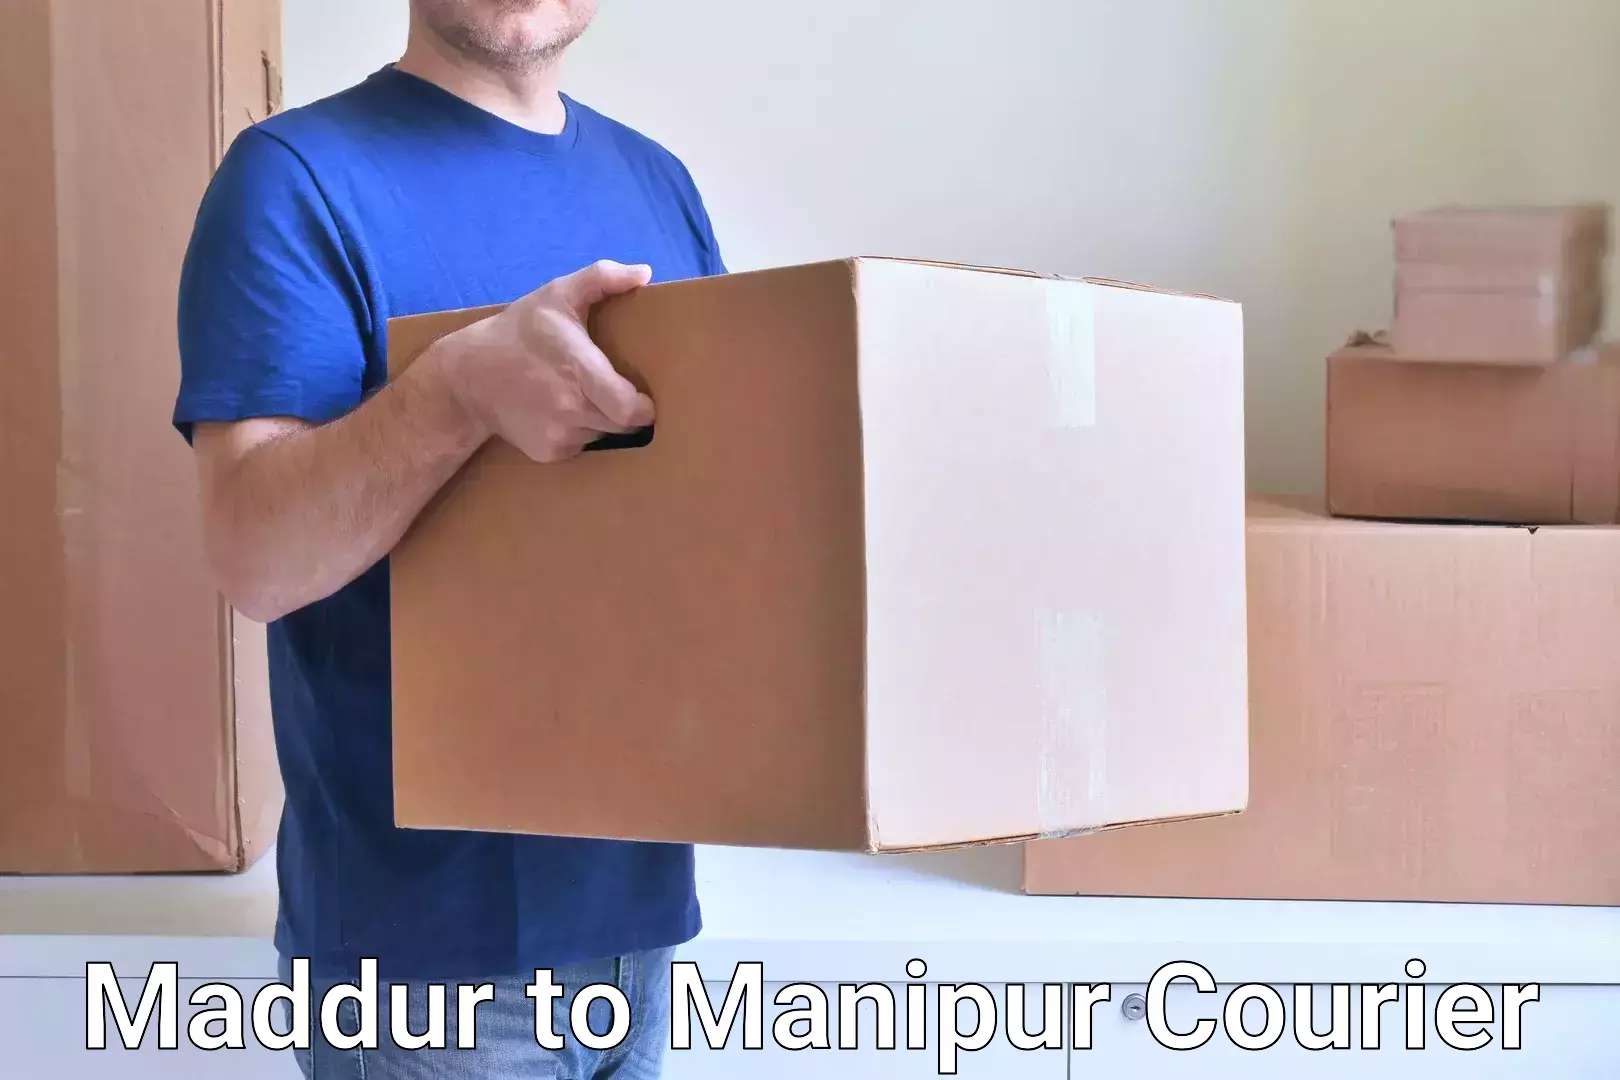 International courier networks Maddur to Manipur